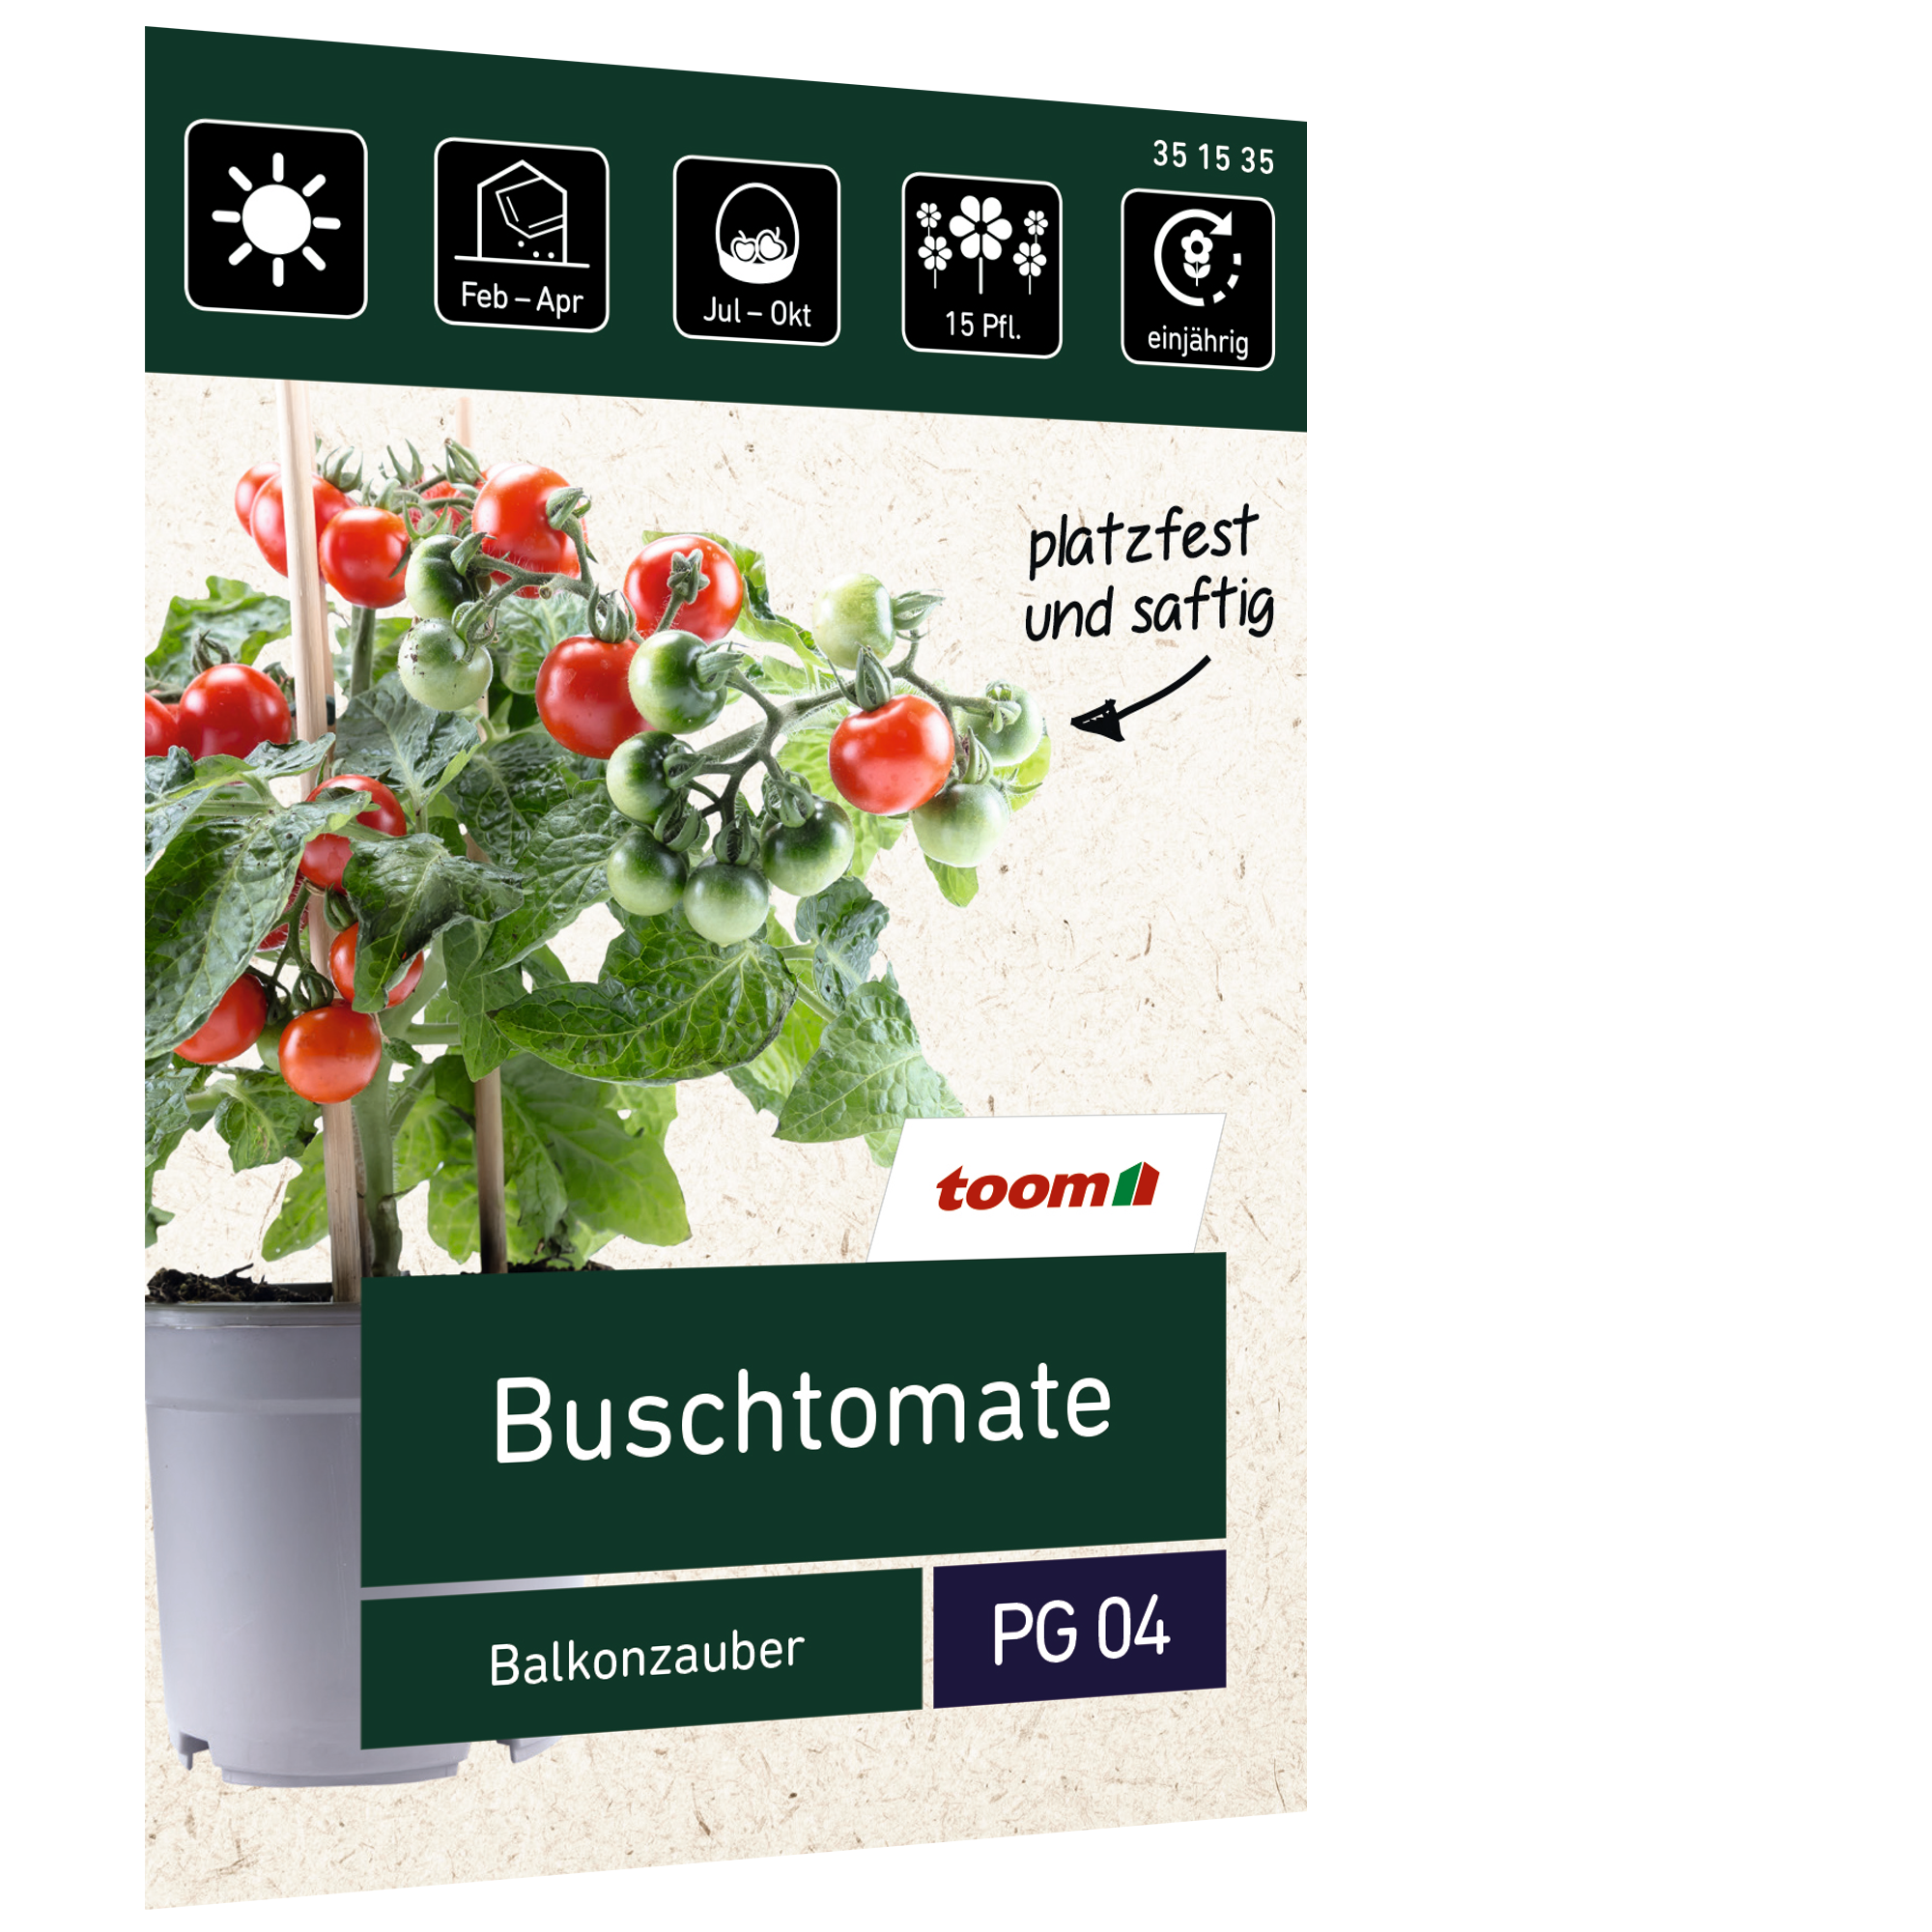 Buschtomate 'Balkonzauber' + product picture